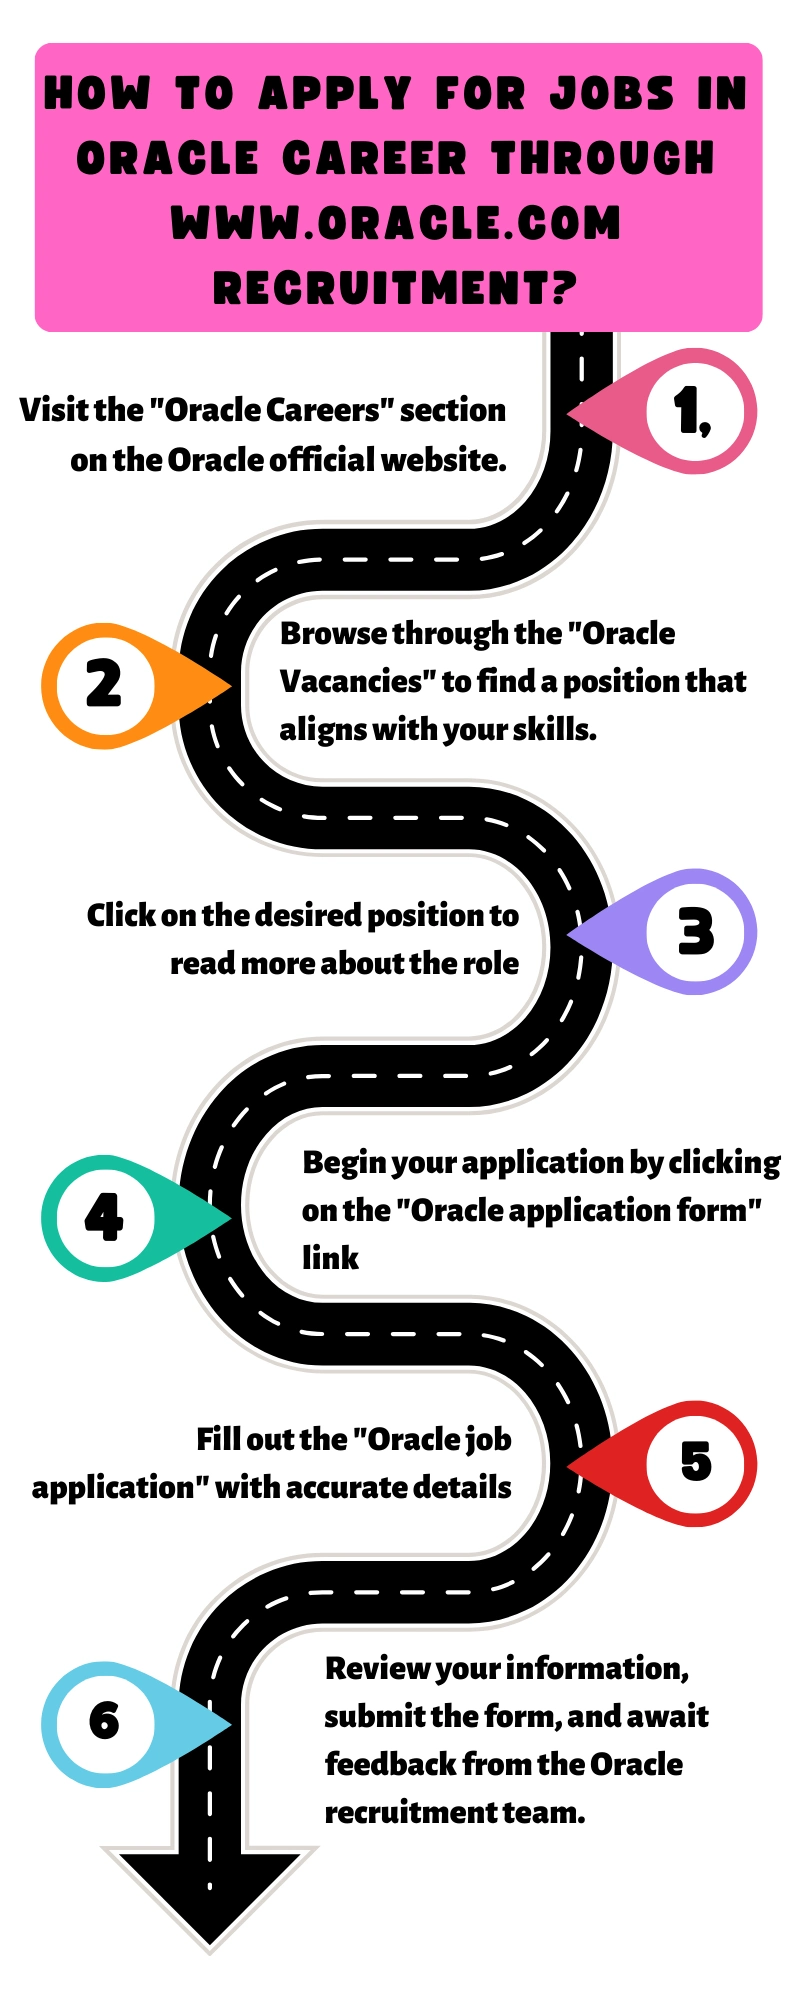 How to Apply for Jobs in Oracle Career through www.oracle.com recruitment?